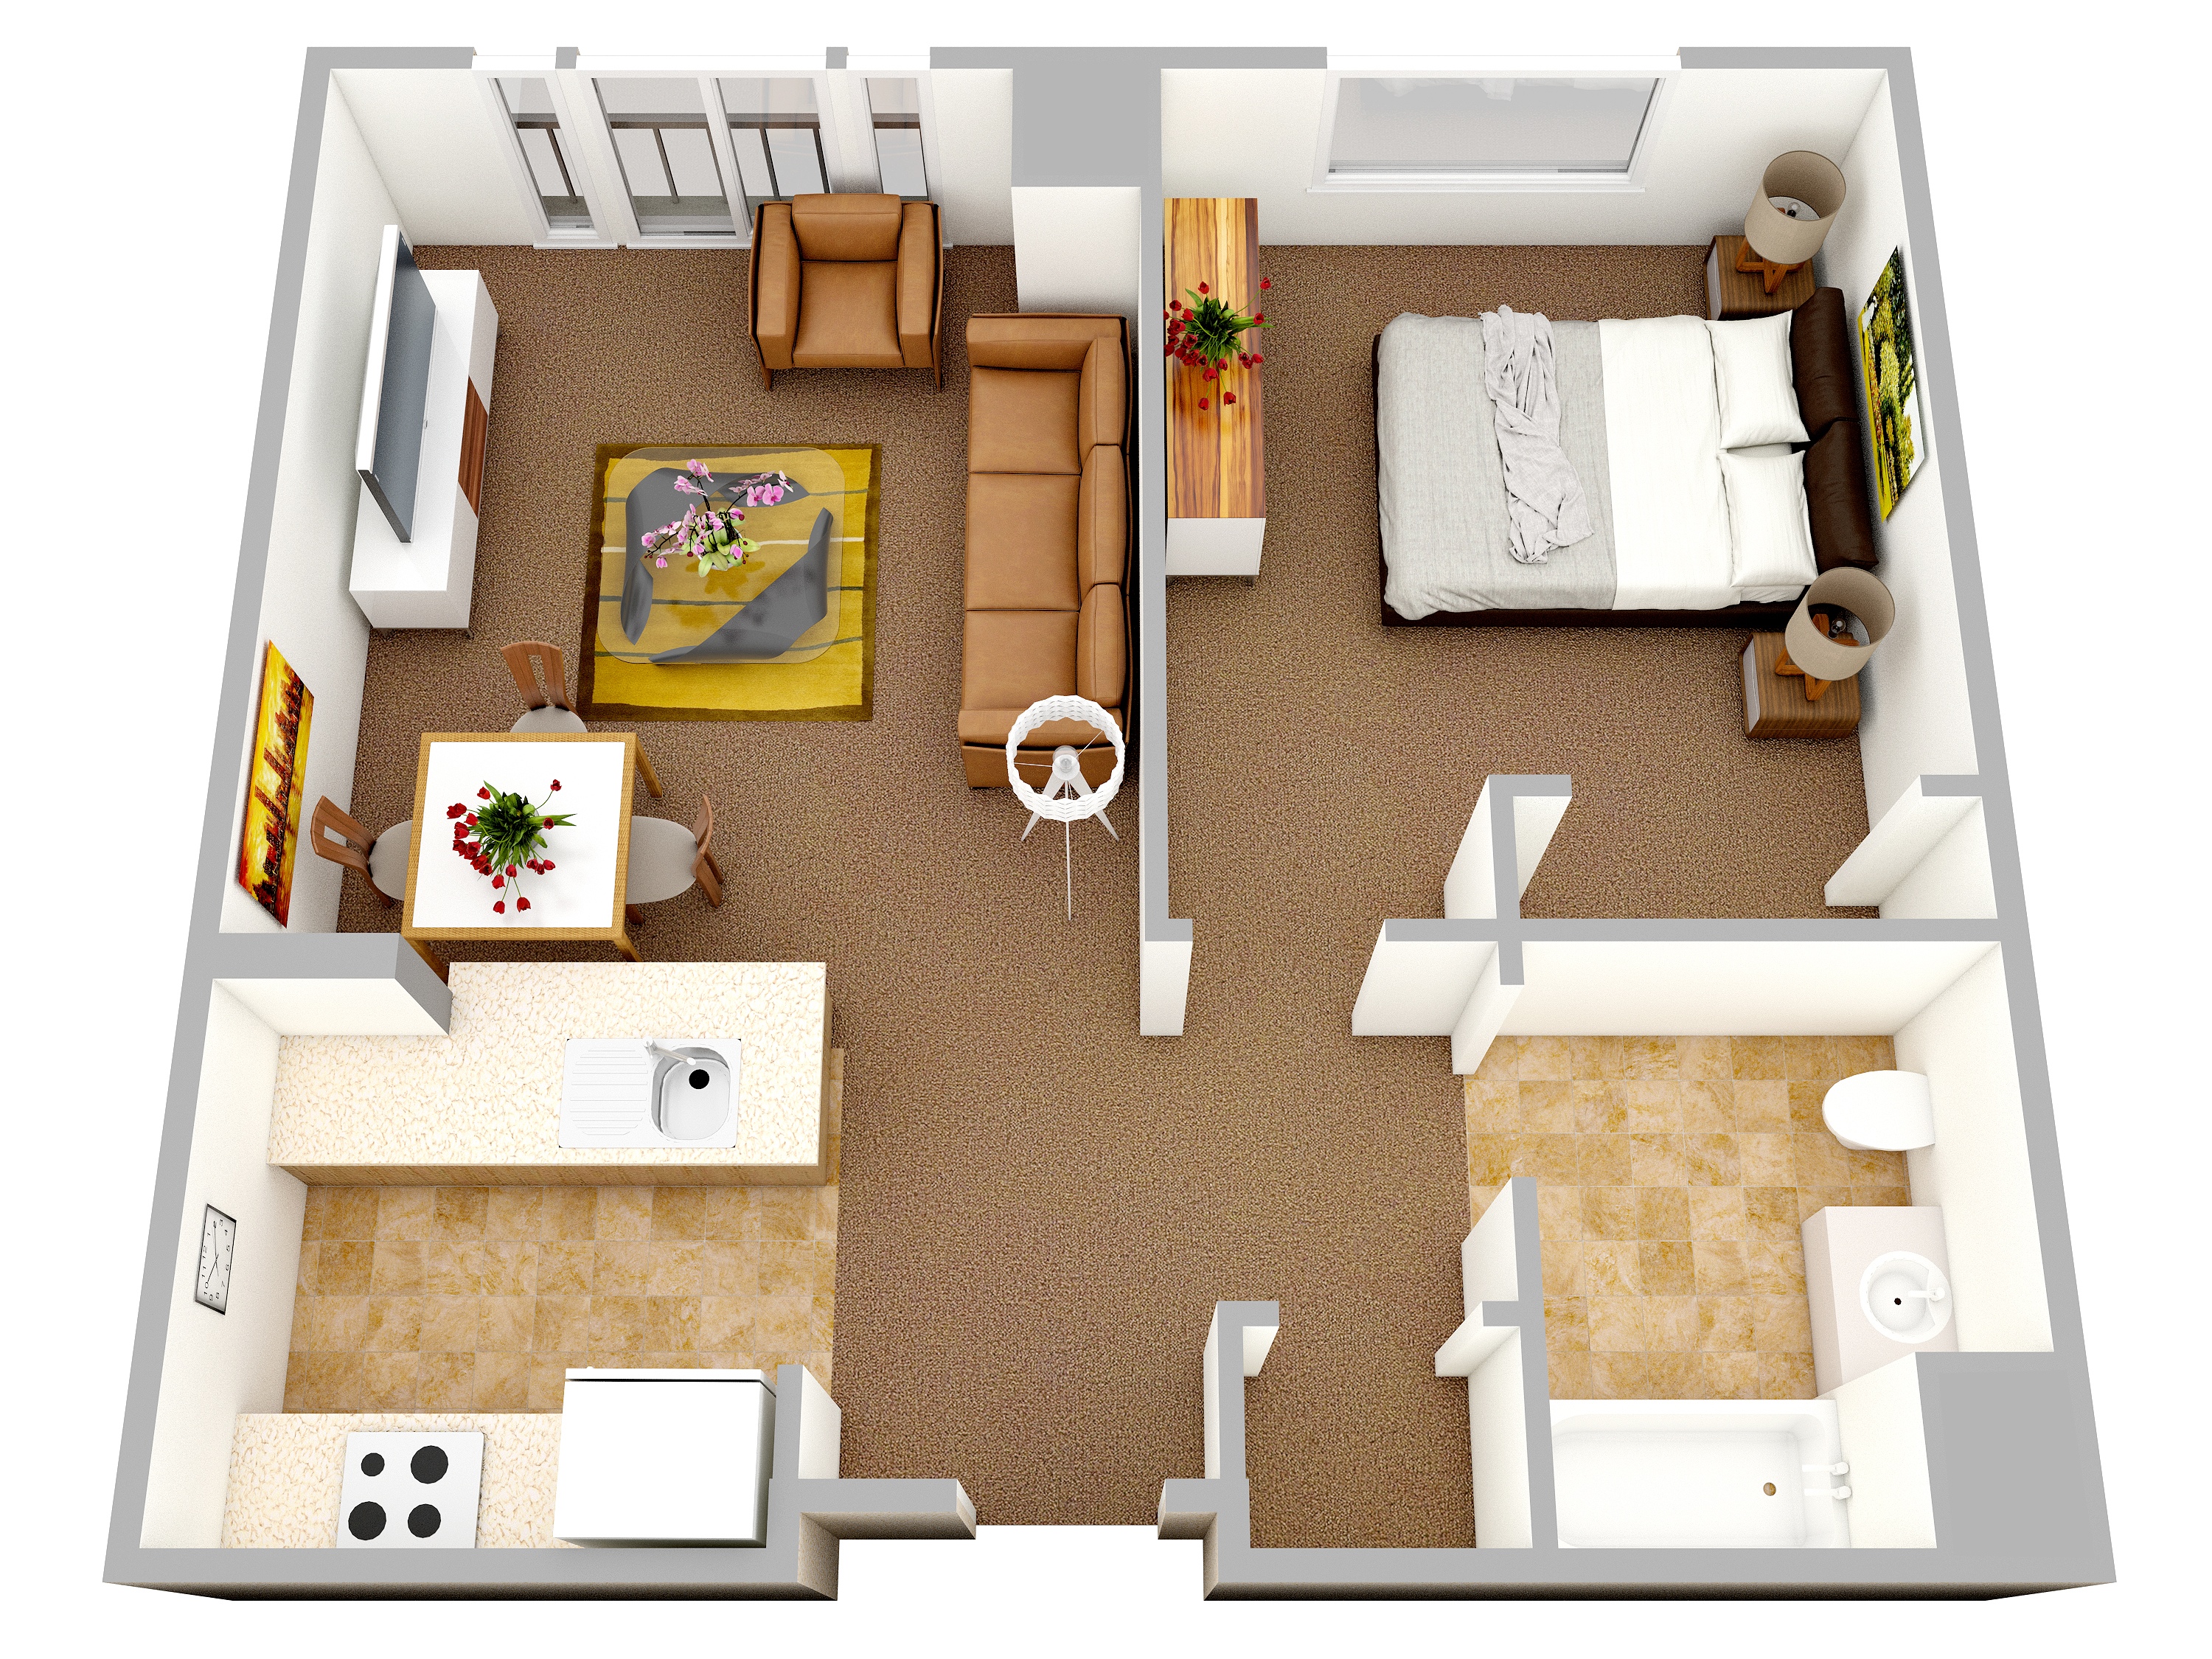 50 One “1” Bedroom Apartment/House Plans Architecture